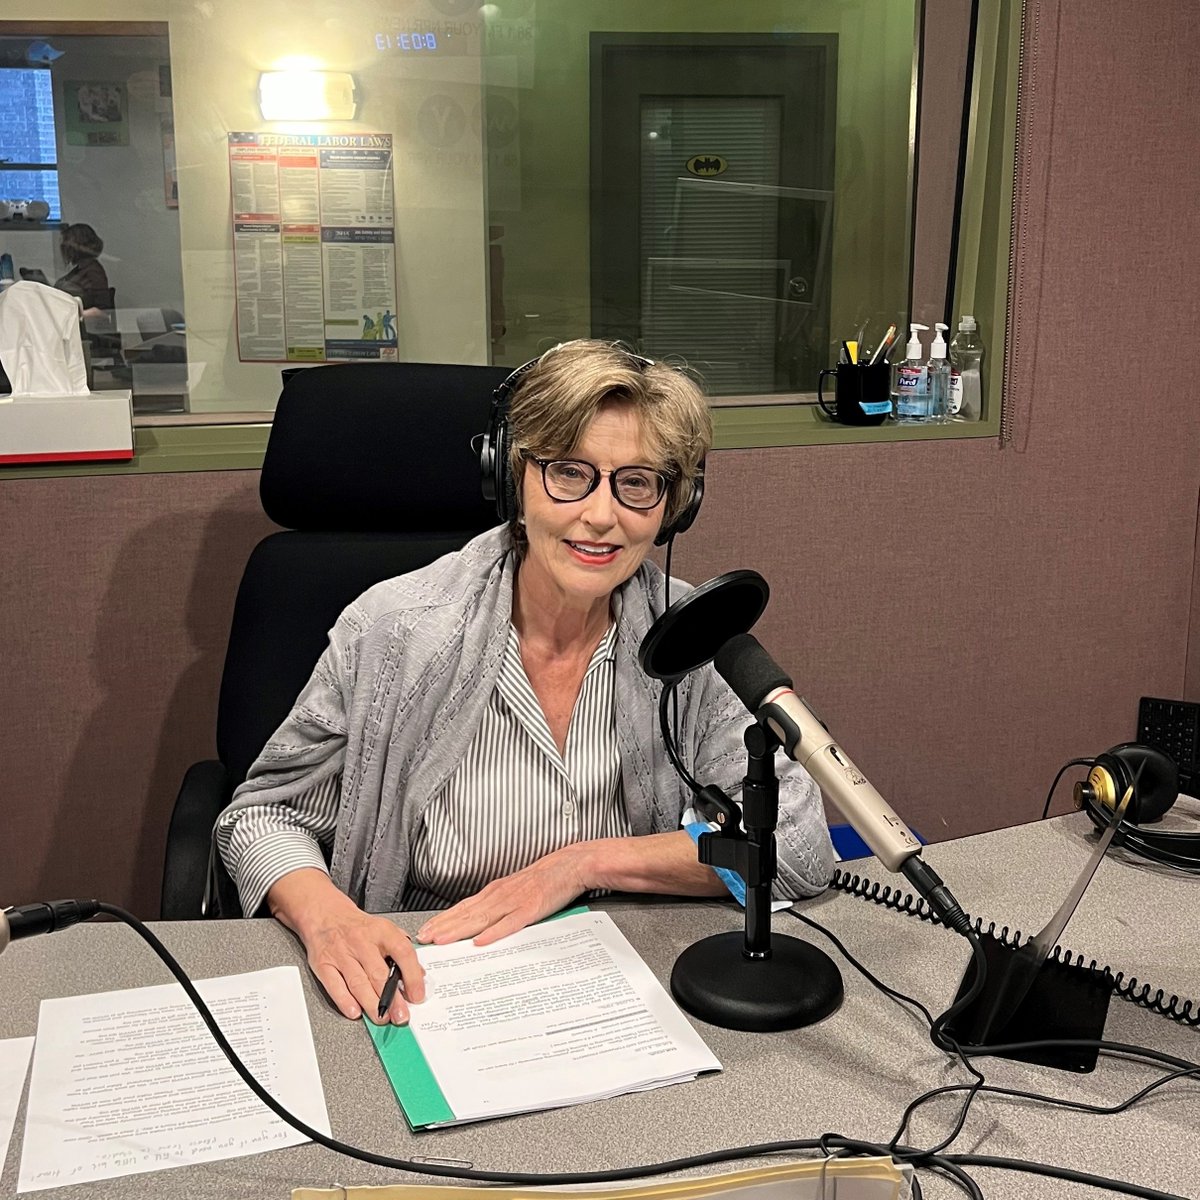 Please join us in saying HAPPY BIRTHDAY to our very own, Sheilah Kast. Thank you for all your work and commitment to public radio! Everyone wish Sheilah a happy birthday in the comments below ❤️